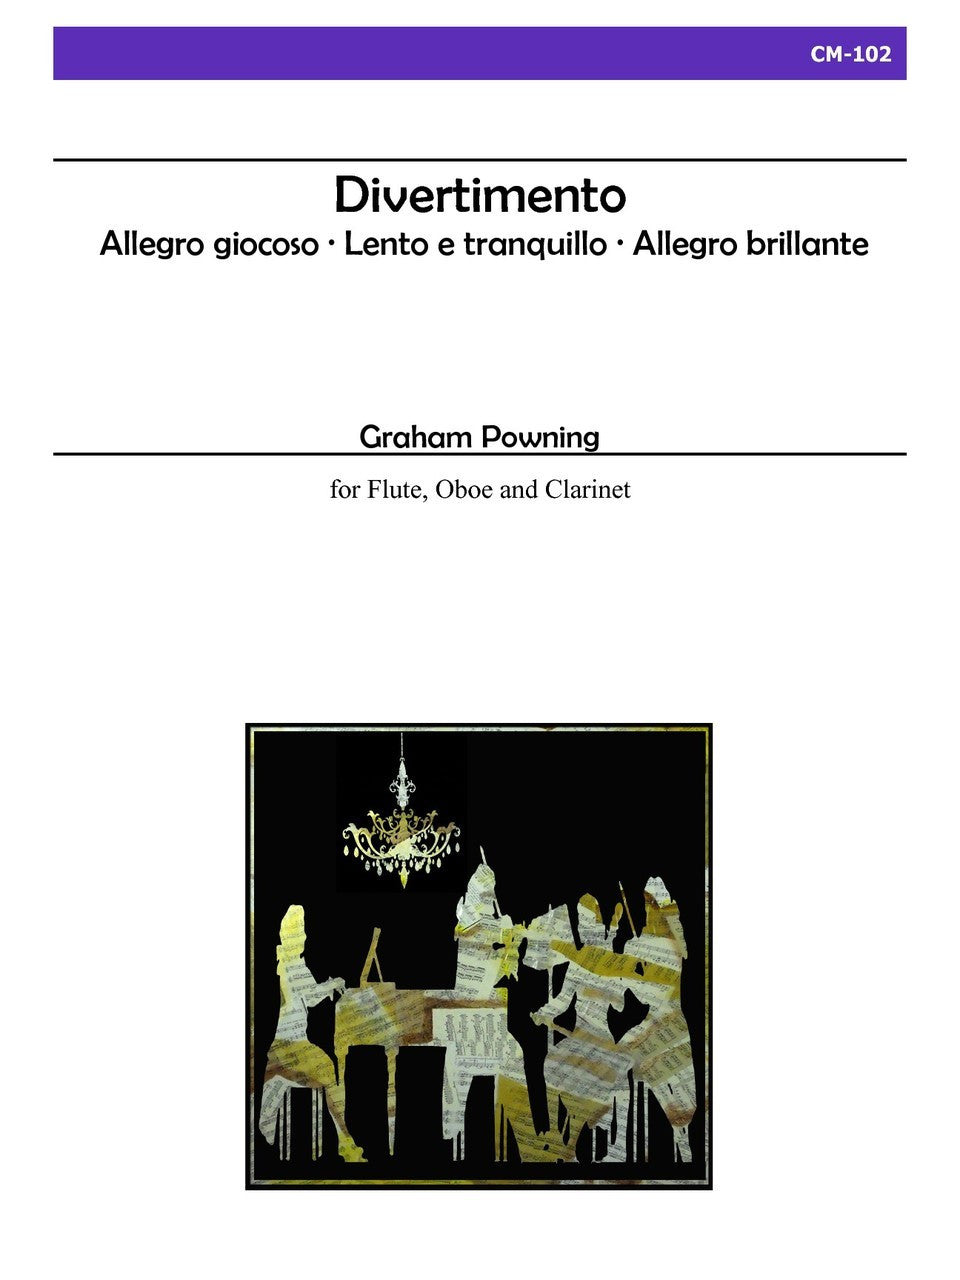 Powning - Divertimento for Flute, Oboe, and Clarinet